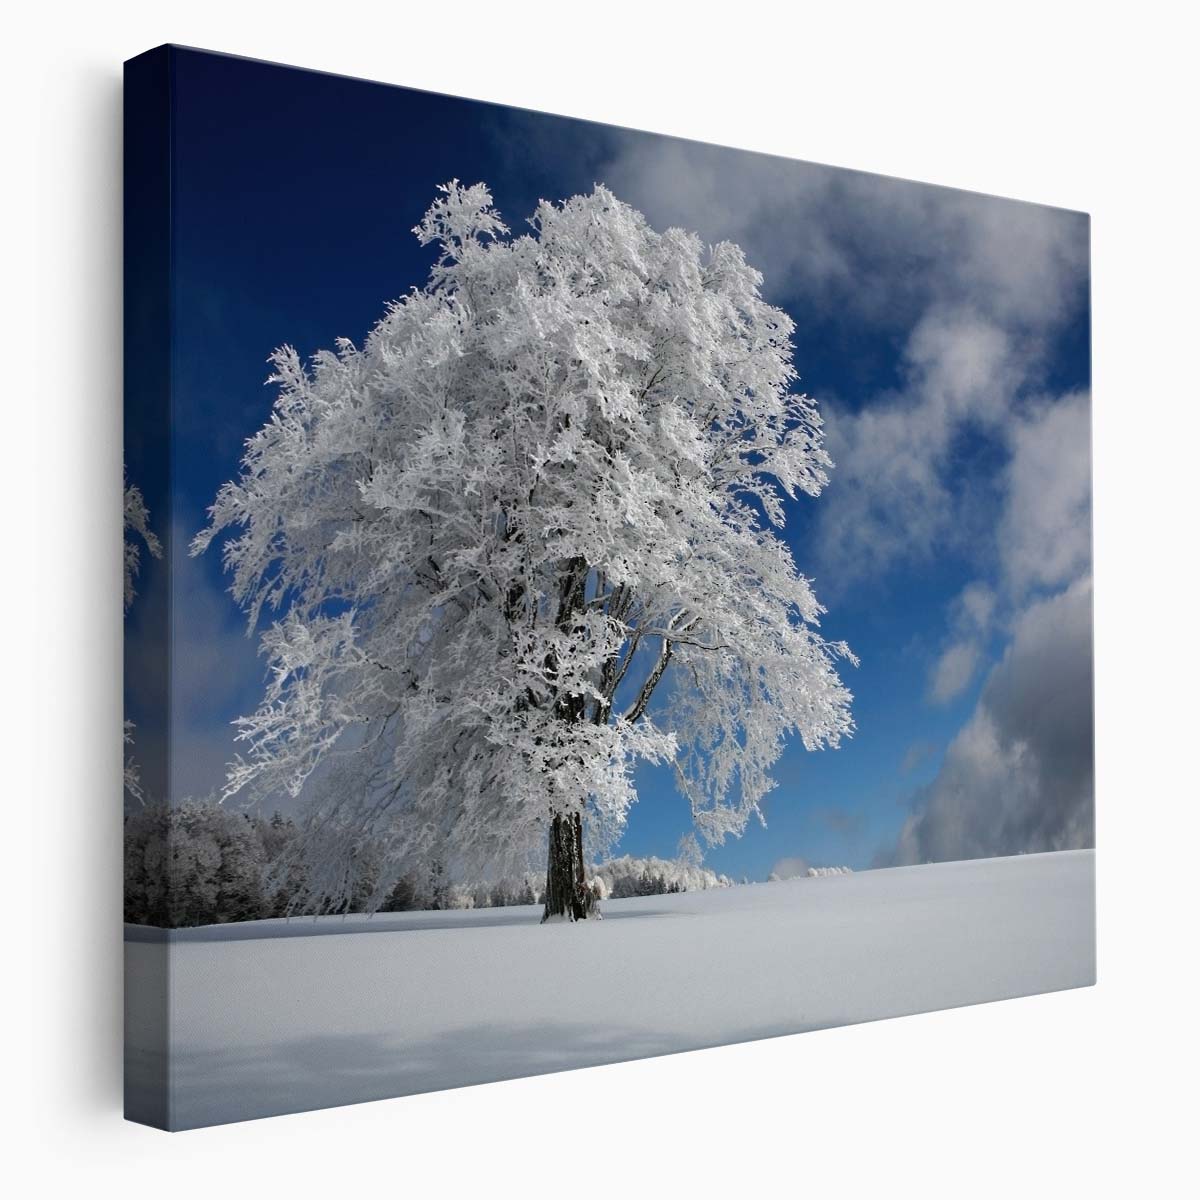 Frozen Solitude Snowy Windbuche Tree Forest Wall Art by Luxuriance Designs. Made in USA.